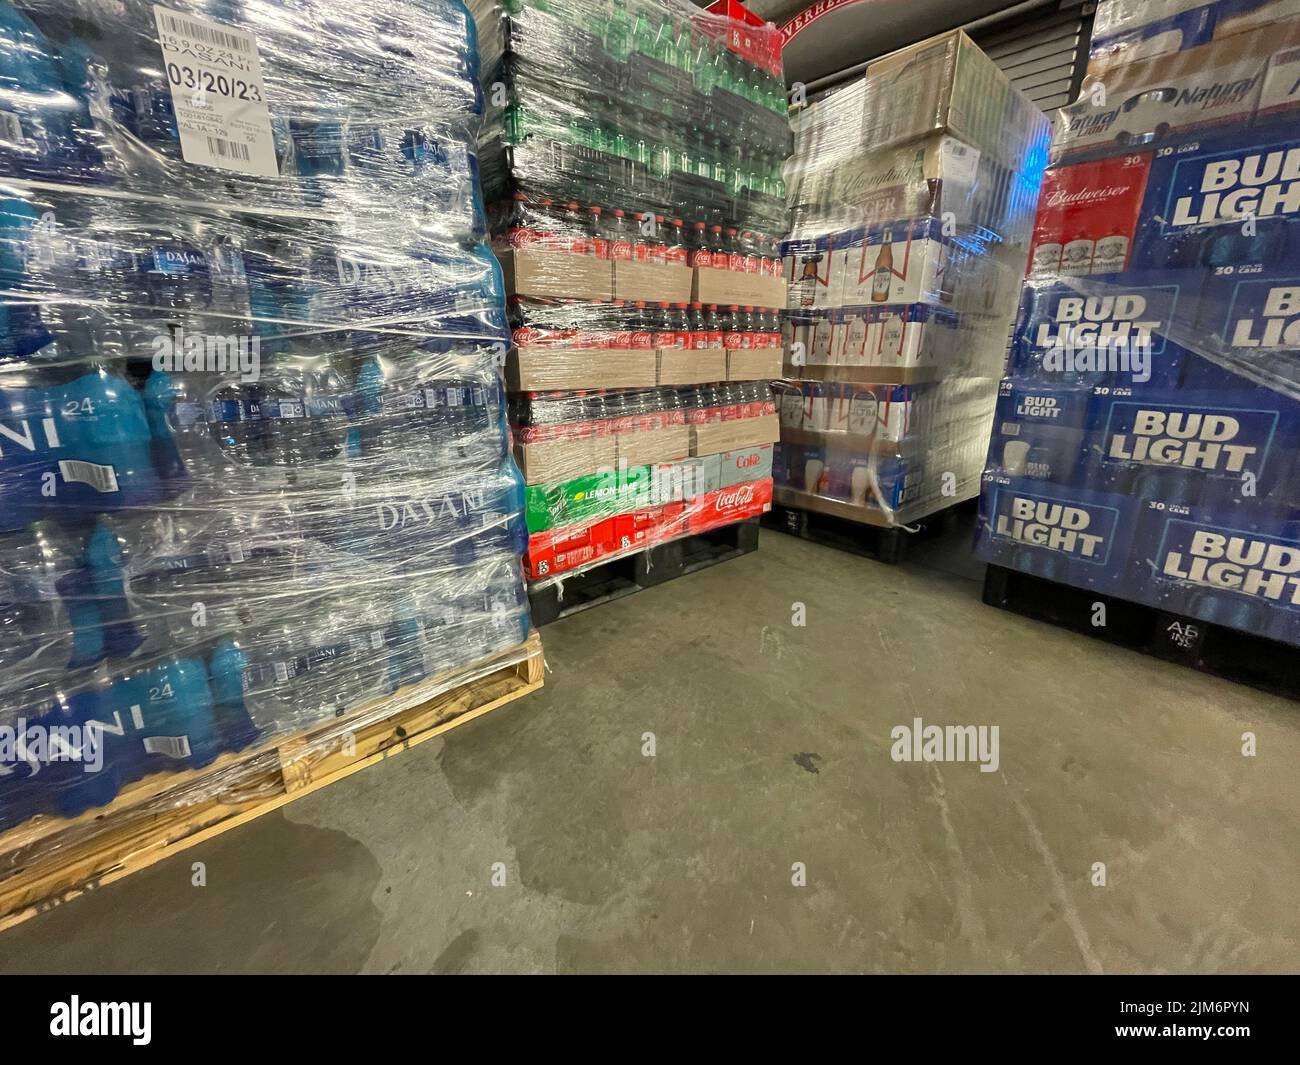 Grovetown, Ga USA - 05 03 22: Retail store drinks plastic wrapped pallets delivery retail store Stock Photo